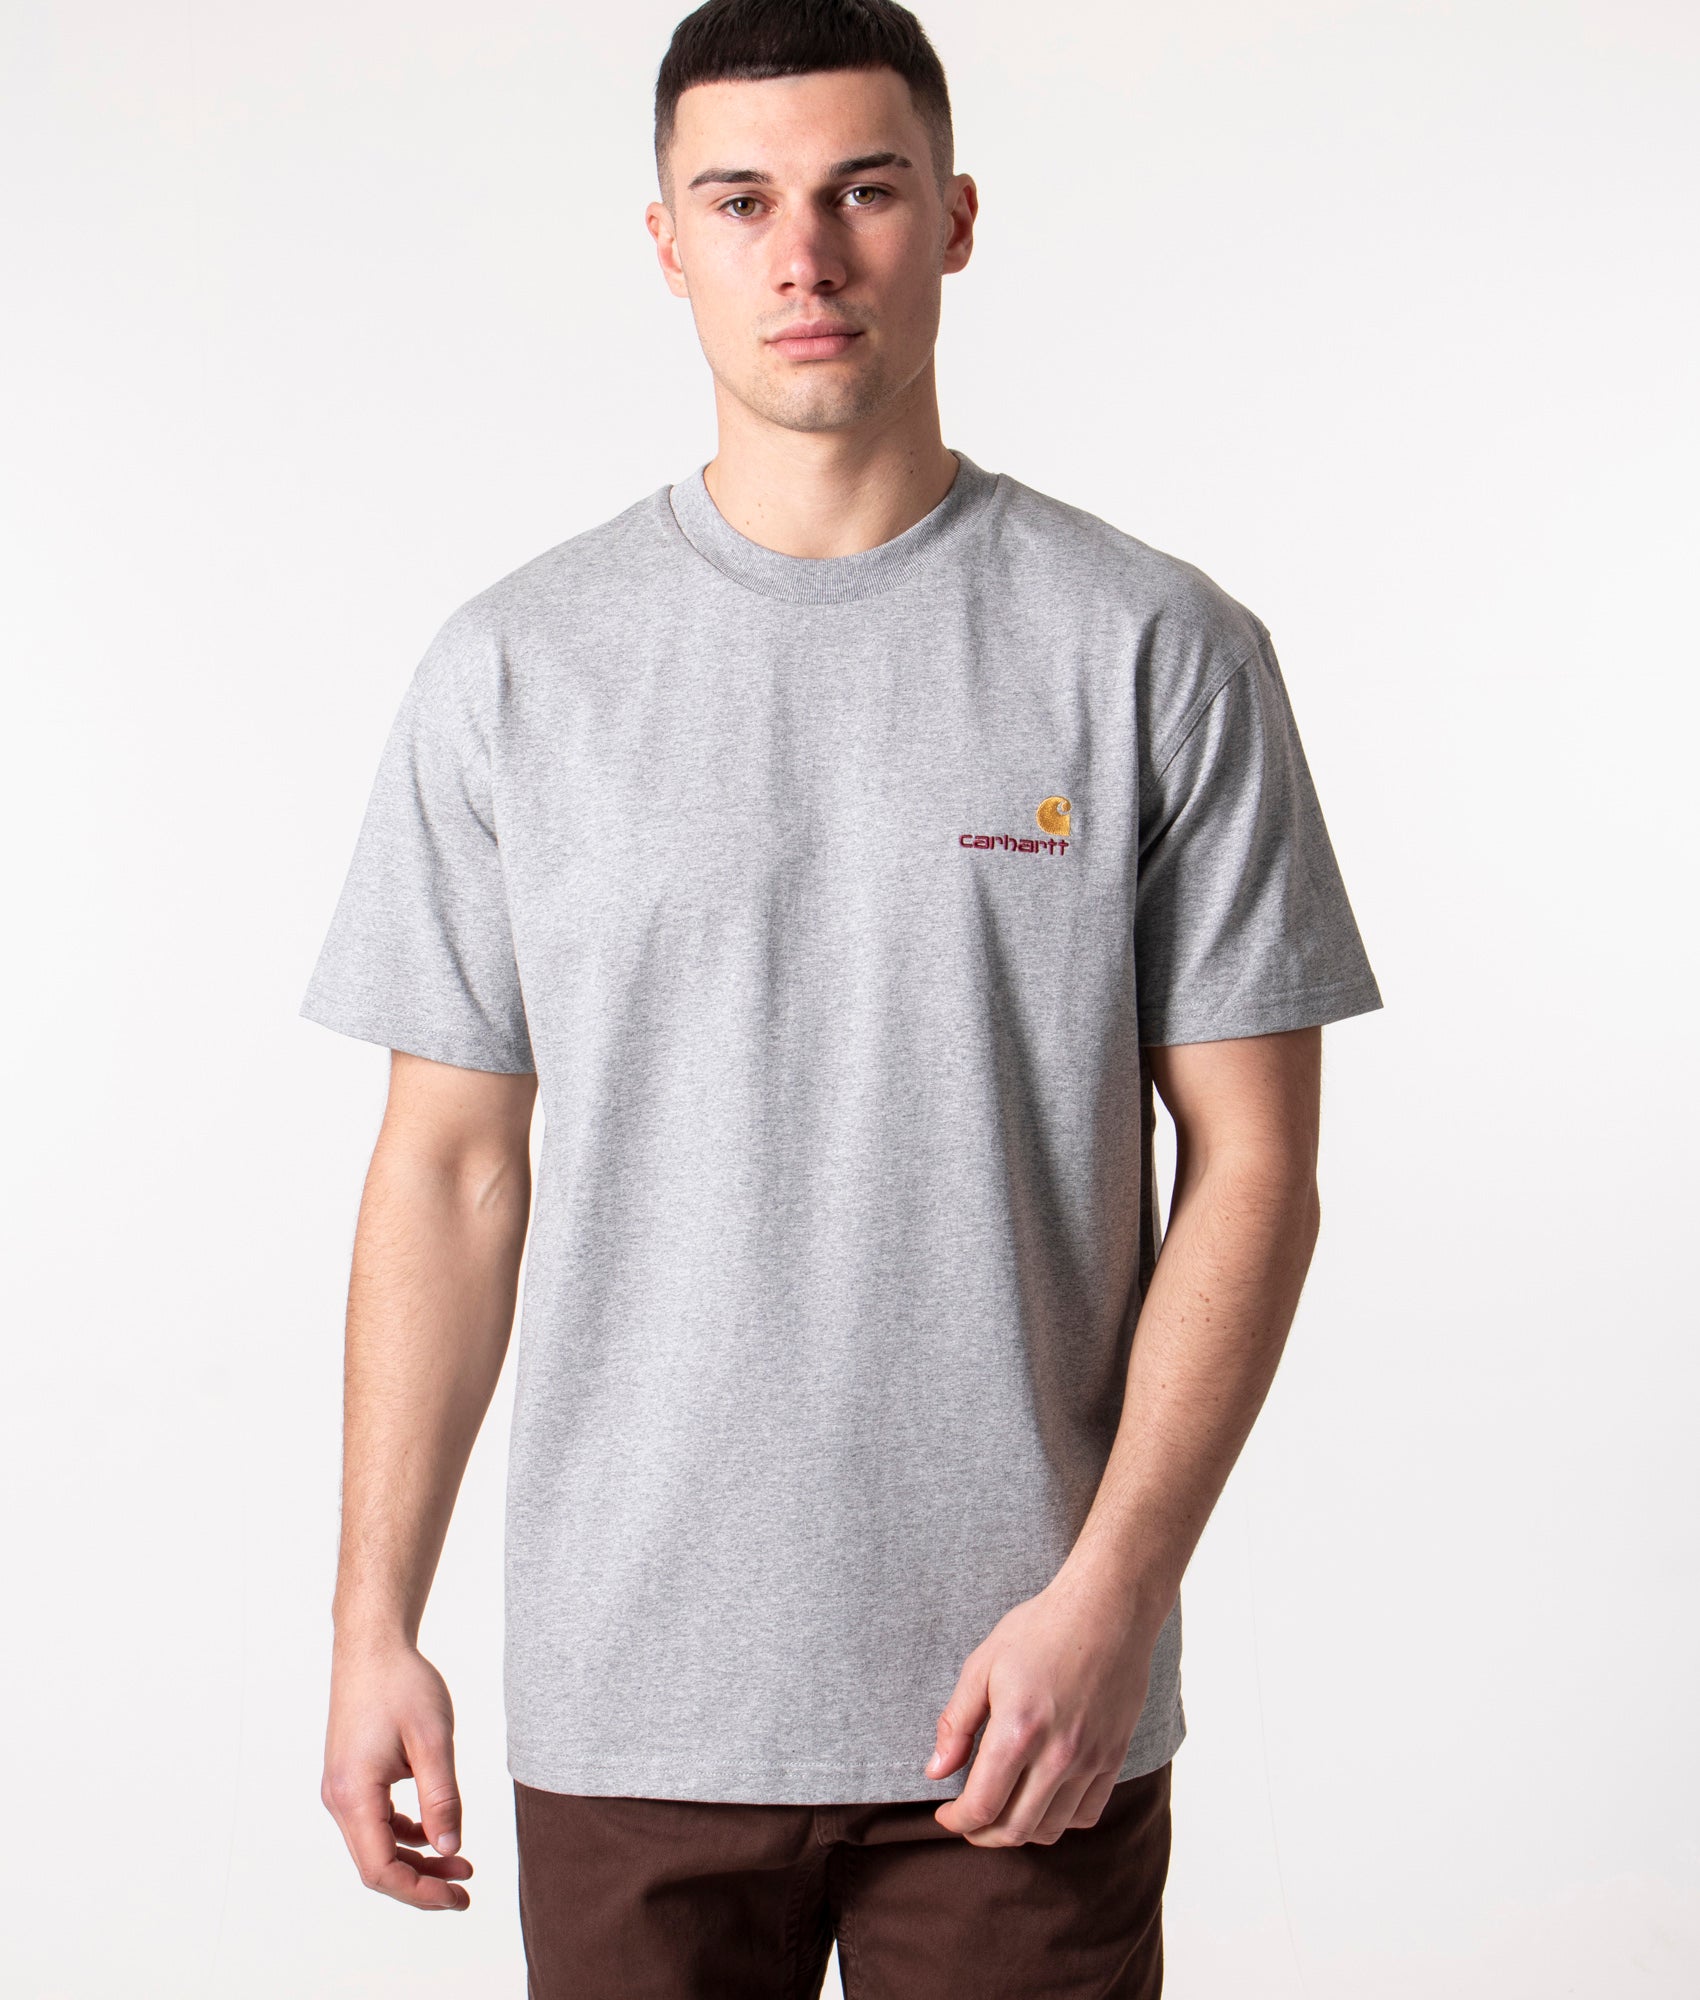 Carhartt WIP Mens Relaxed Fit American Script T-Shirt - Colour: V6XX Grey Heather - Size: XL